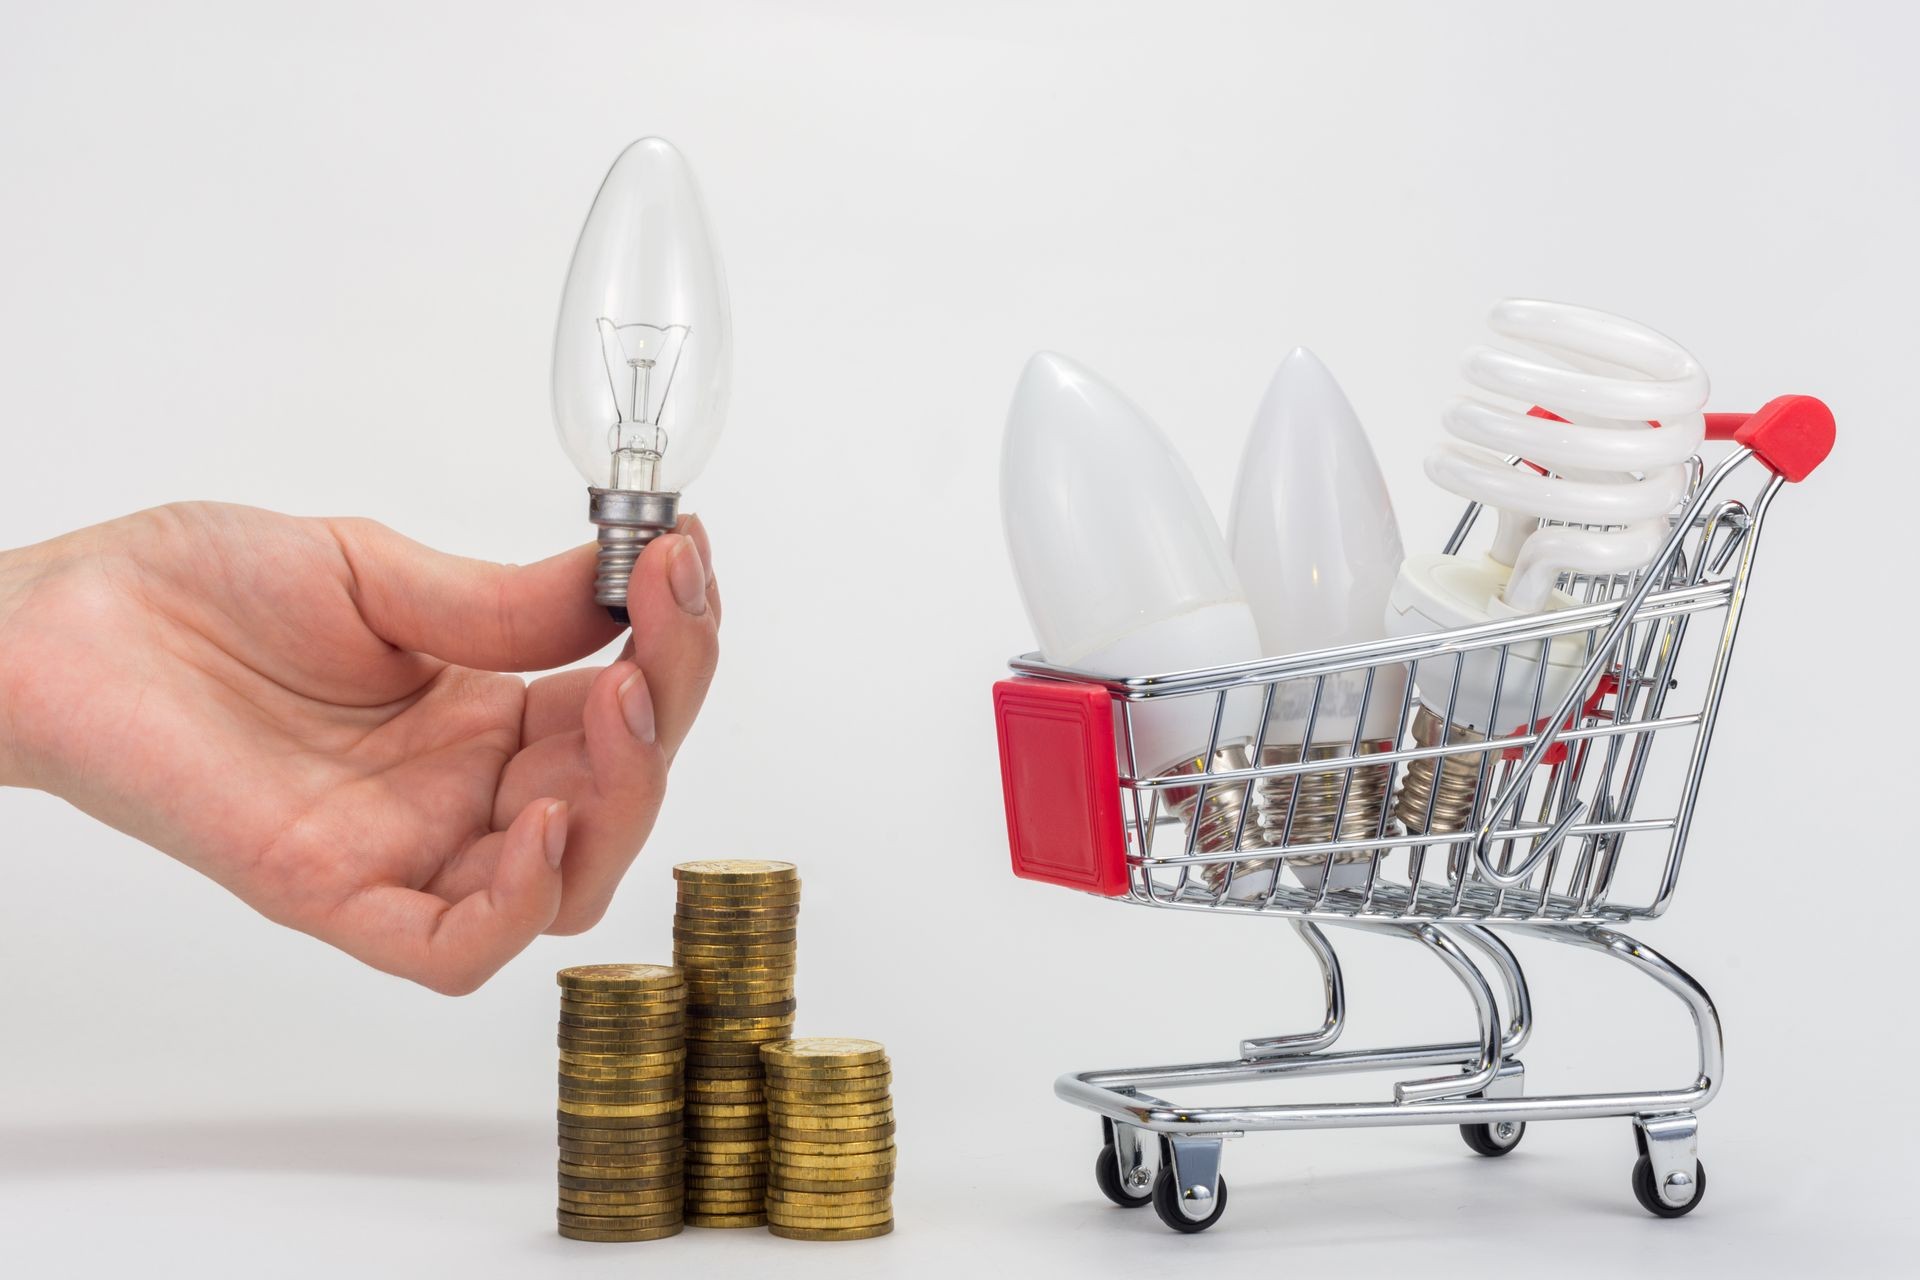 In the grocery cart are LED and energy-saving light bulbs, next to a hand is holding an incandescent lamp, there is a stack of coins